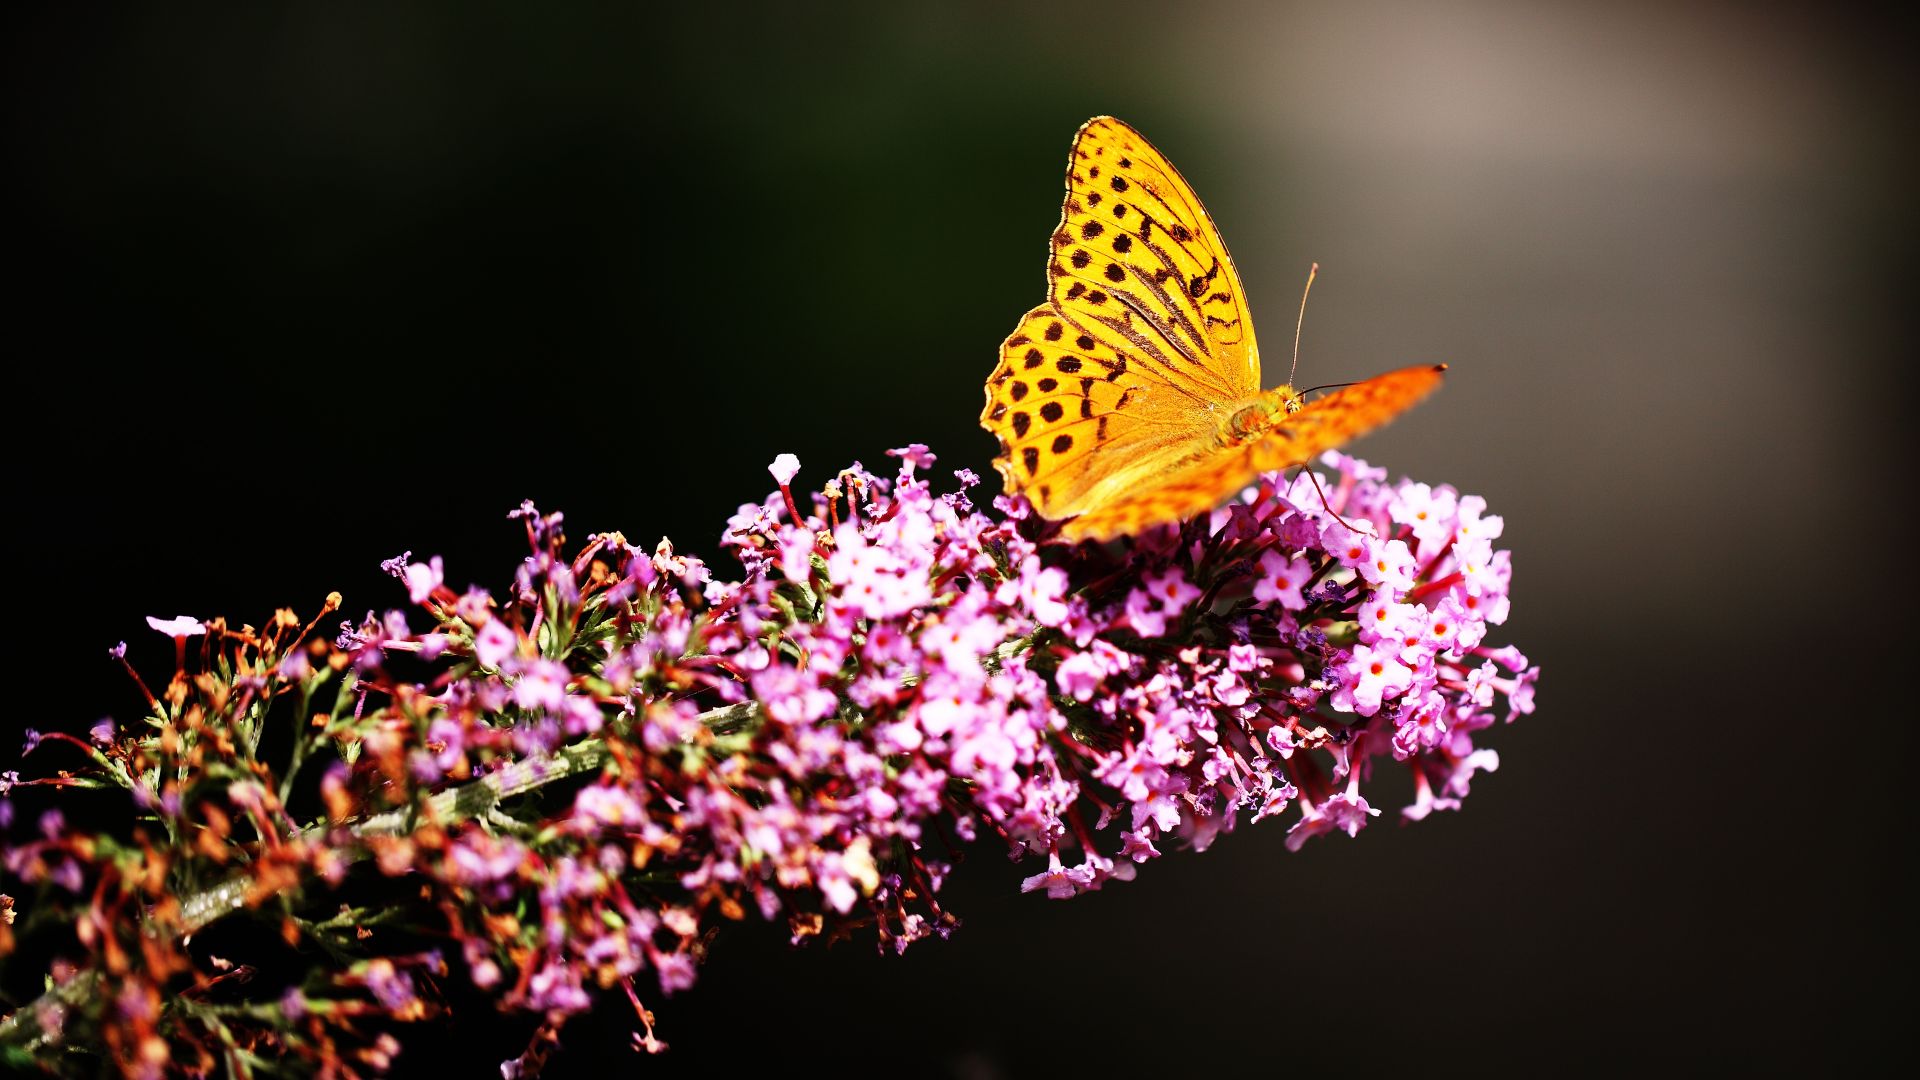 Butterfly, insects, flowers, Glass, nature, garden (horizontal)